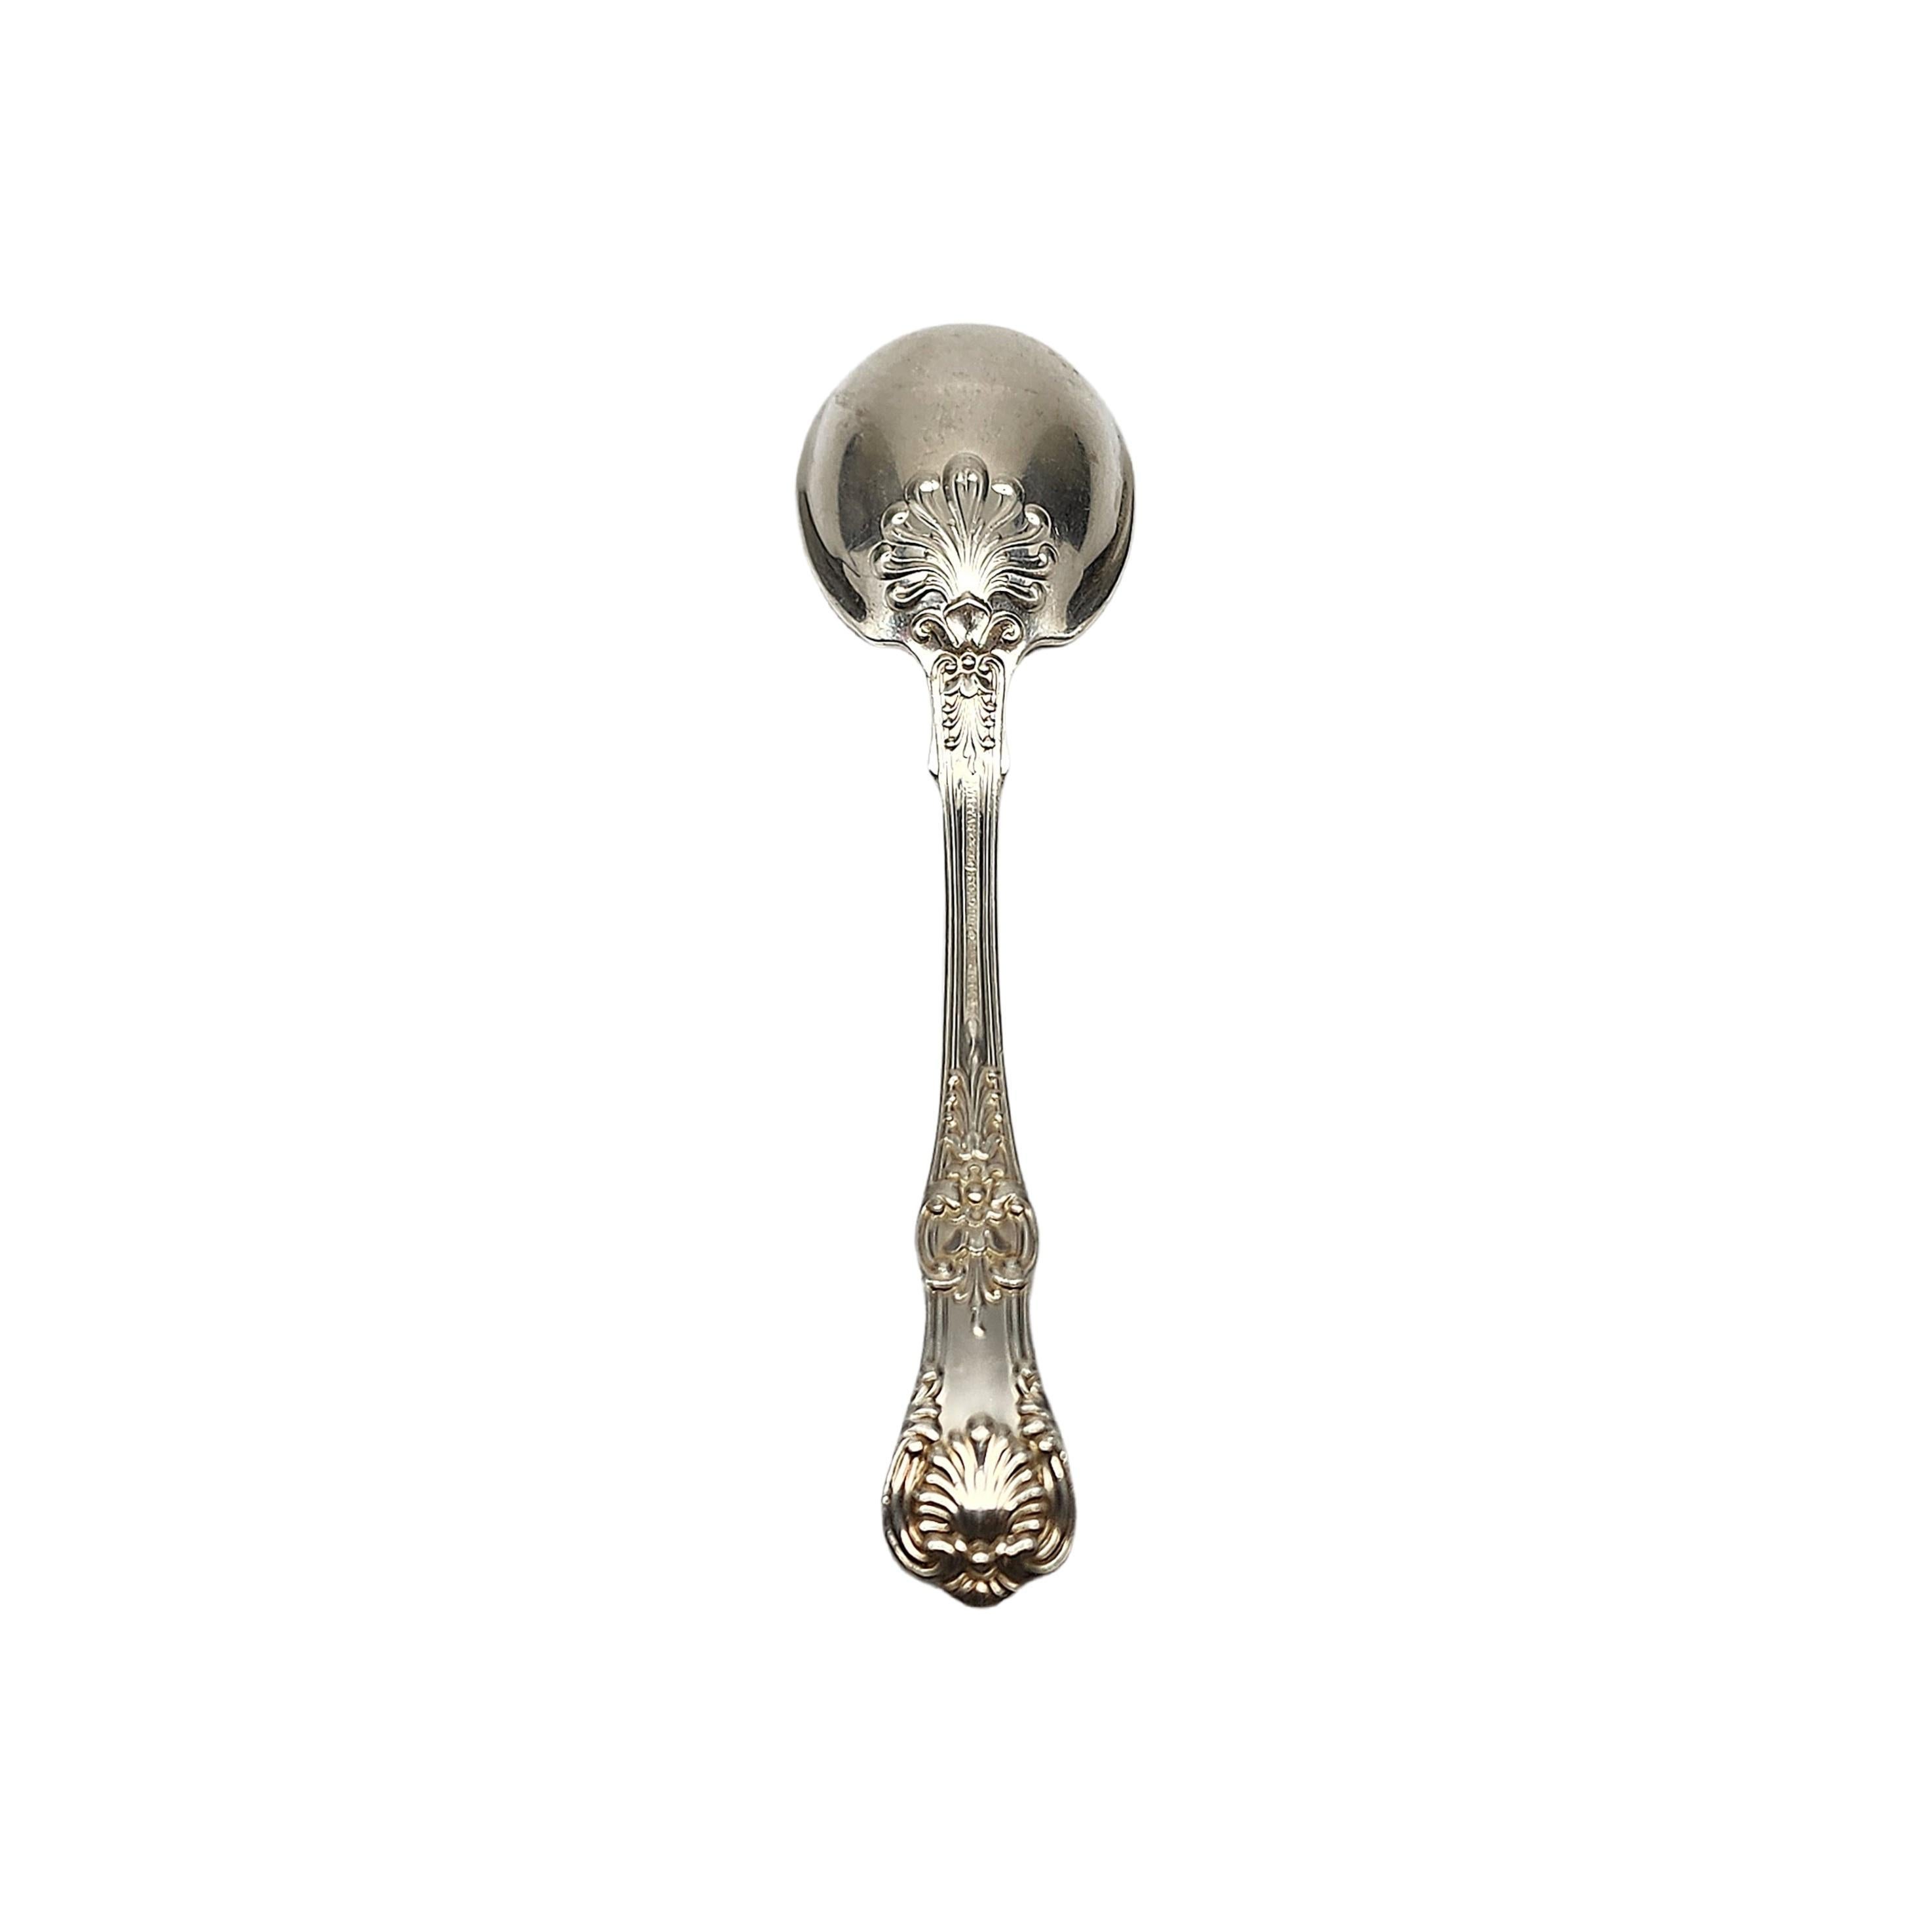 Sterling silver sugar spoon by Tiffany & Co in the English King pattern.

No monogram.

Beautiful small spoon in Tiffany's intricate and decorative version of a King pattern, which were very popular in the late 19th century. The M mark dates this